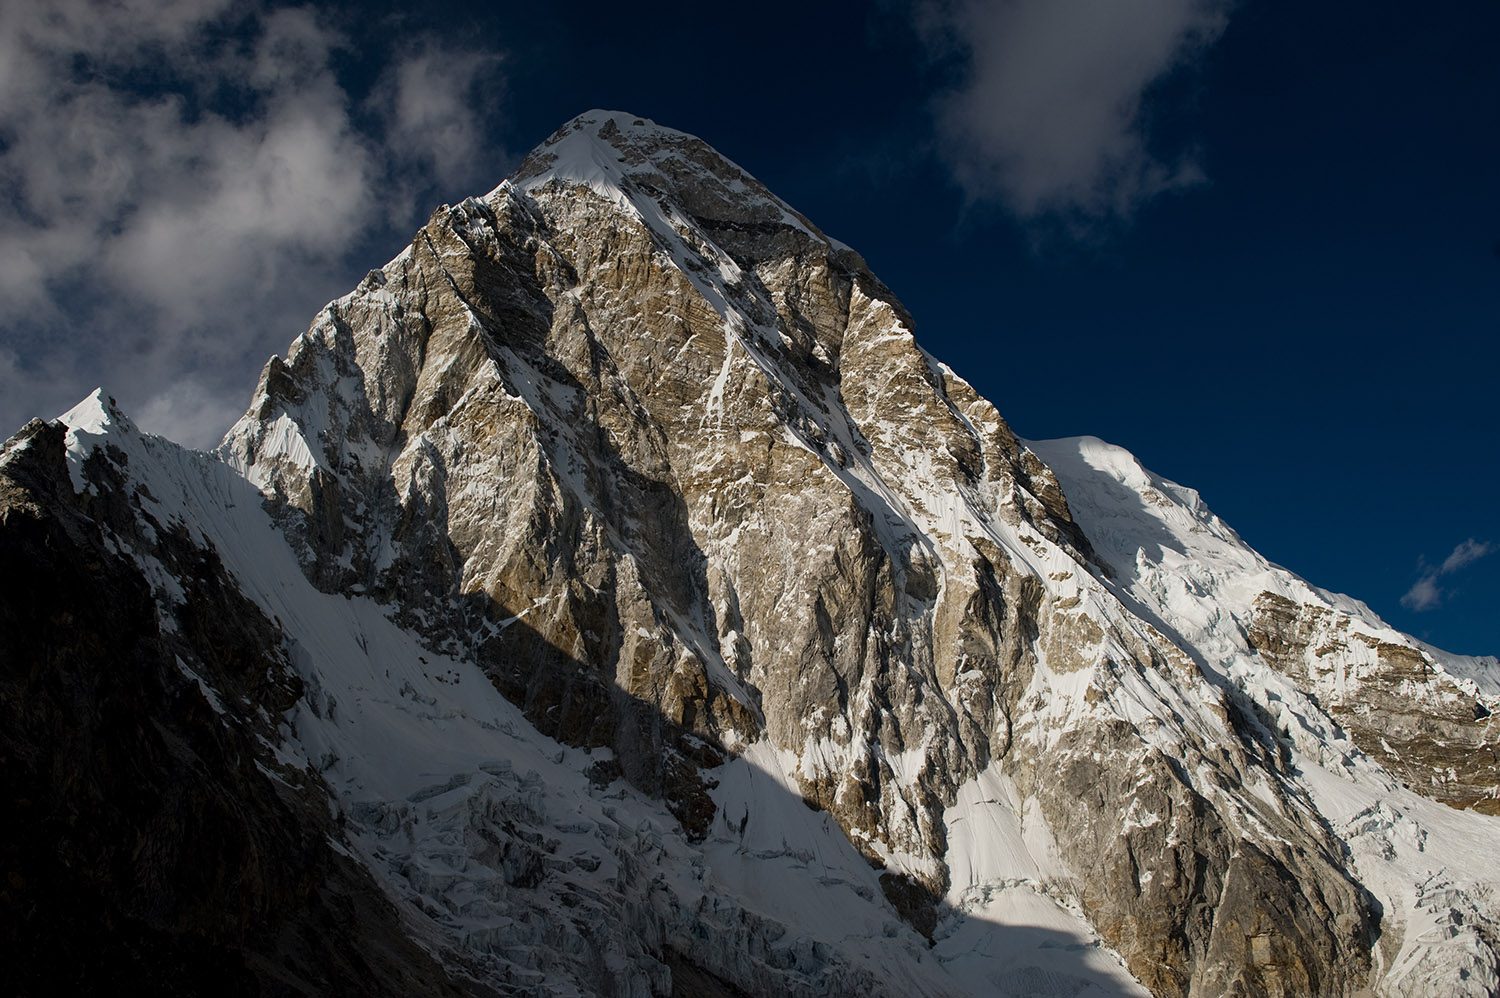 Mountain communities, climbers and scientists sound alarm from Everest and call for world leaders to decarbonise now